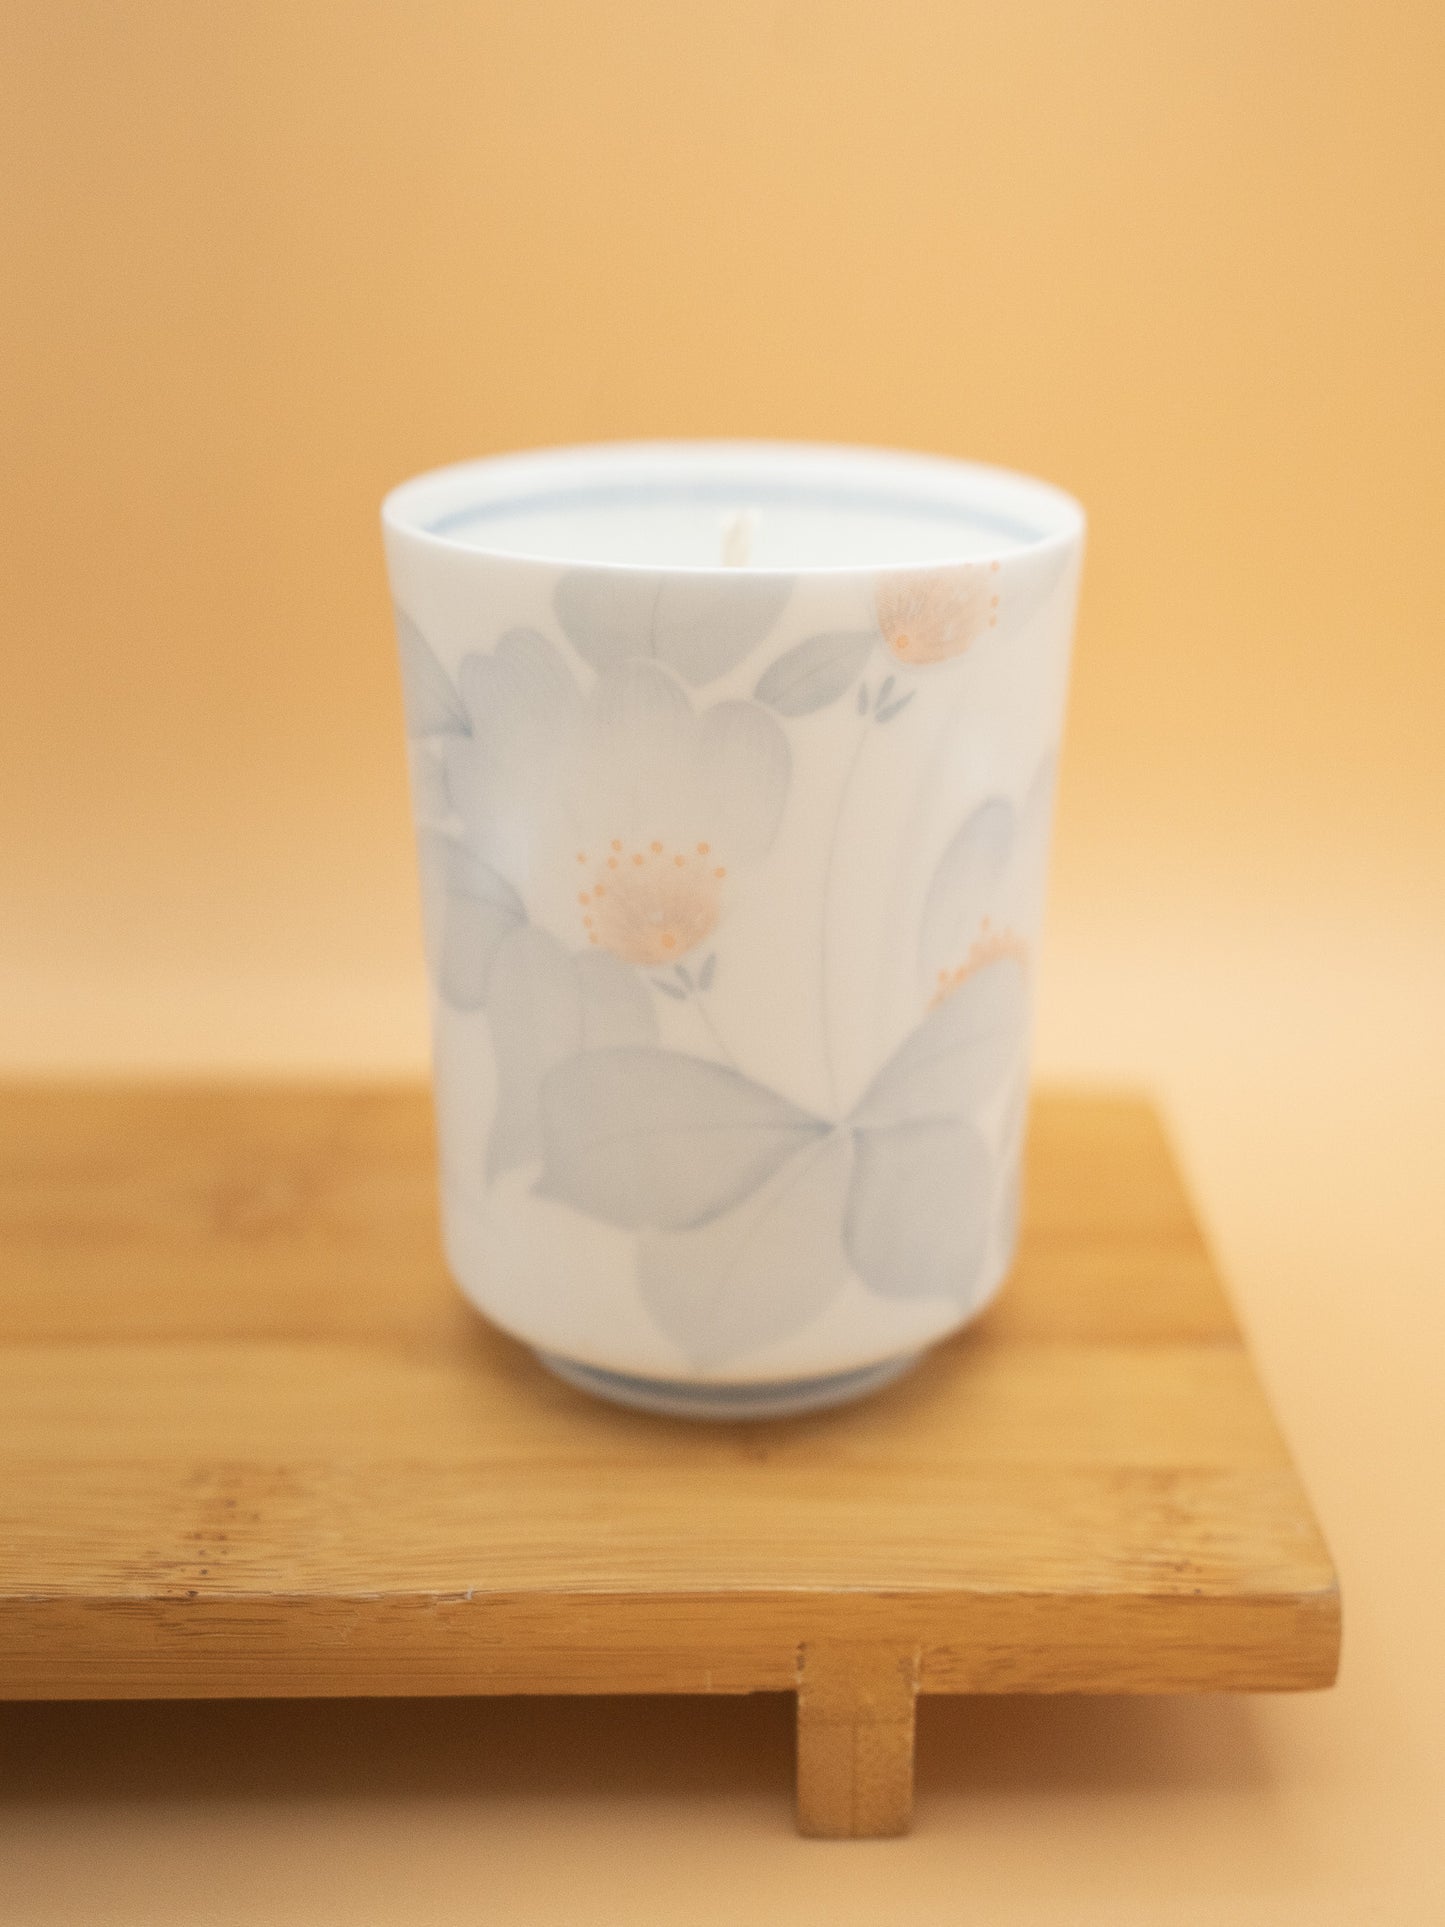 Sairen x Lulumiere Teacup Candle, Peony No.2